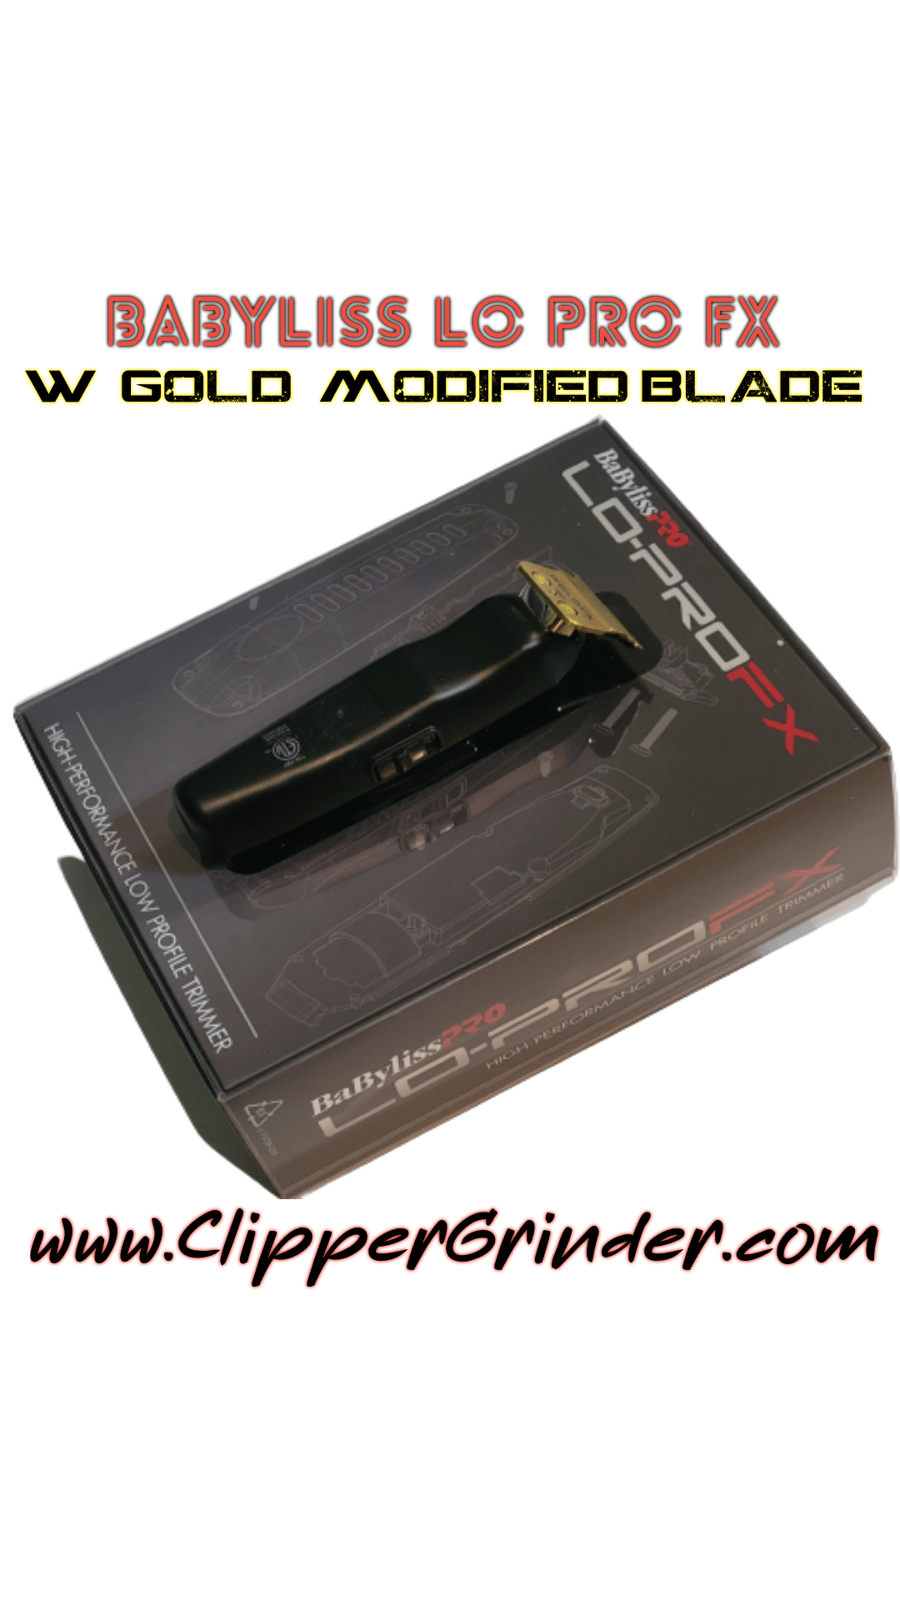 Image of (3 Week Delivery) Babyliss Lo Pro FX Trimmer W/"Gold" Modified Blade